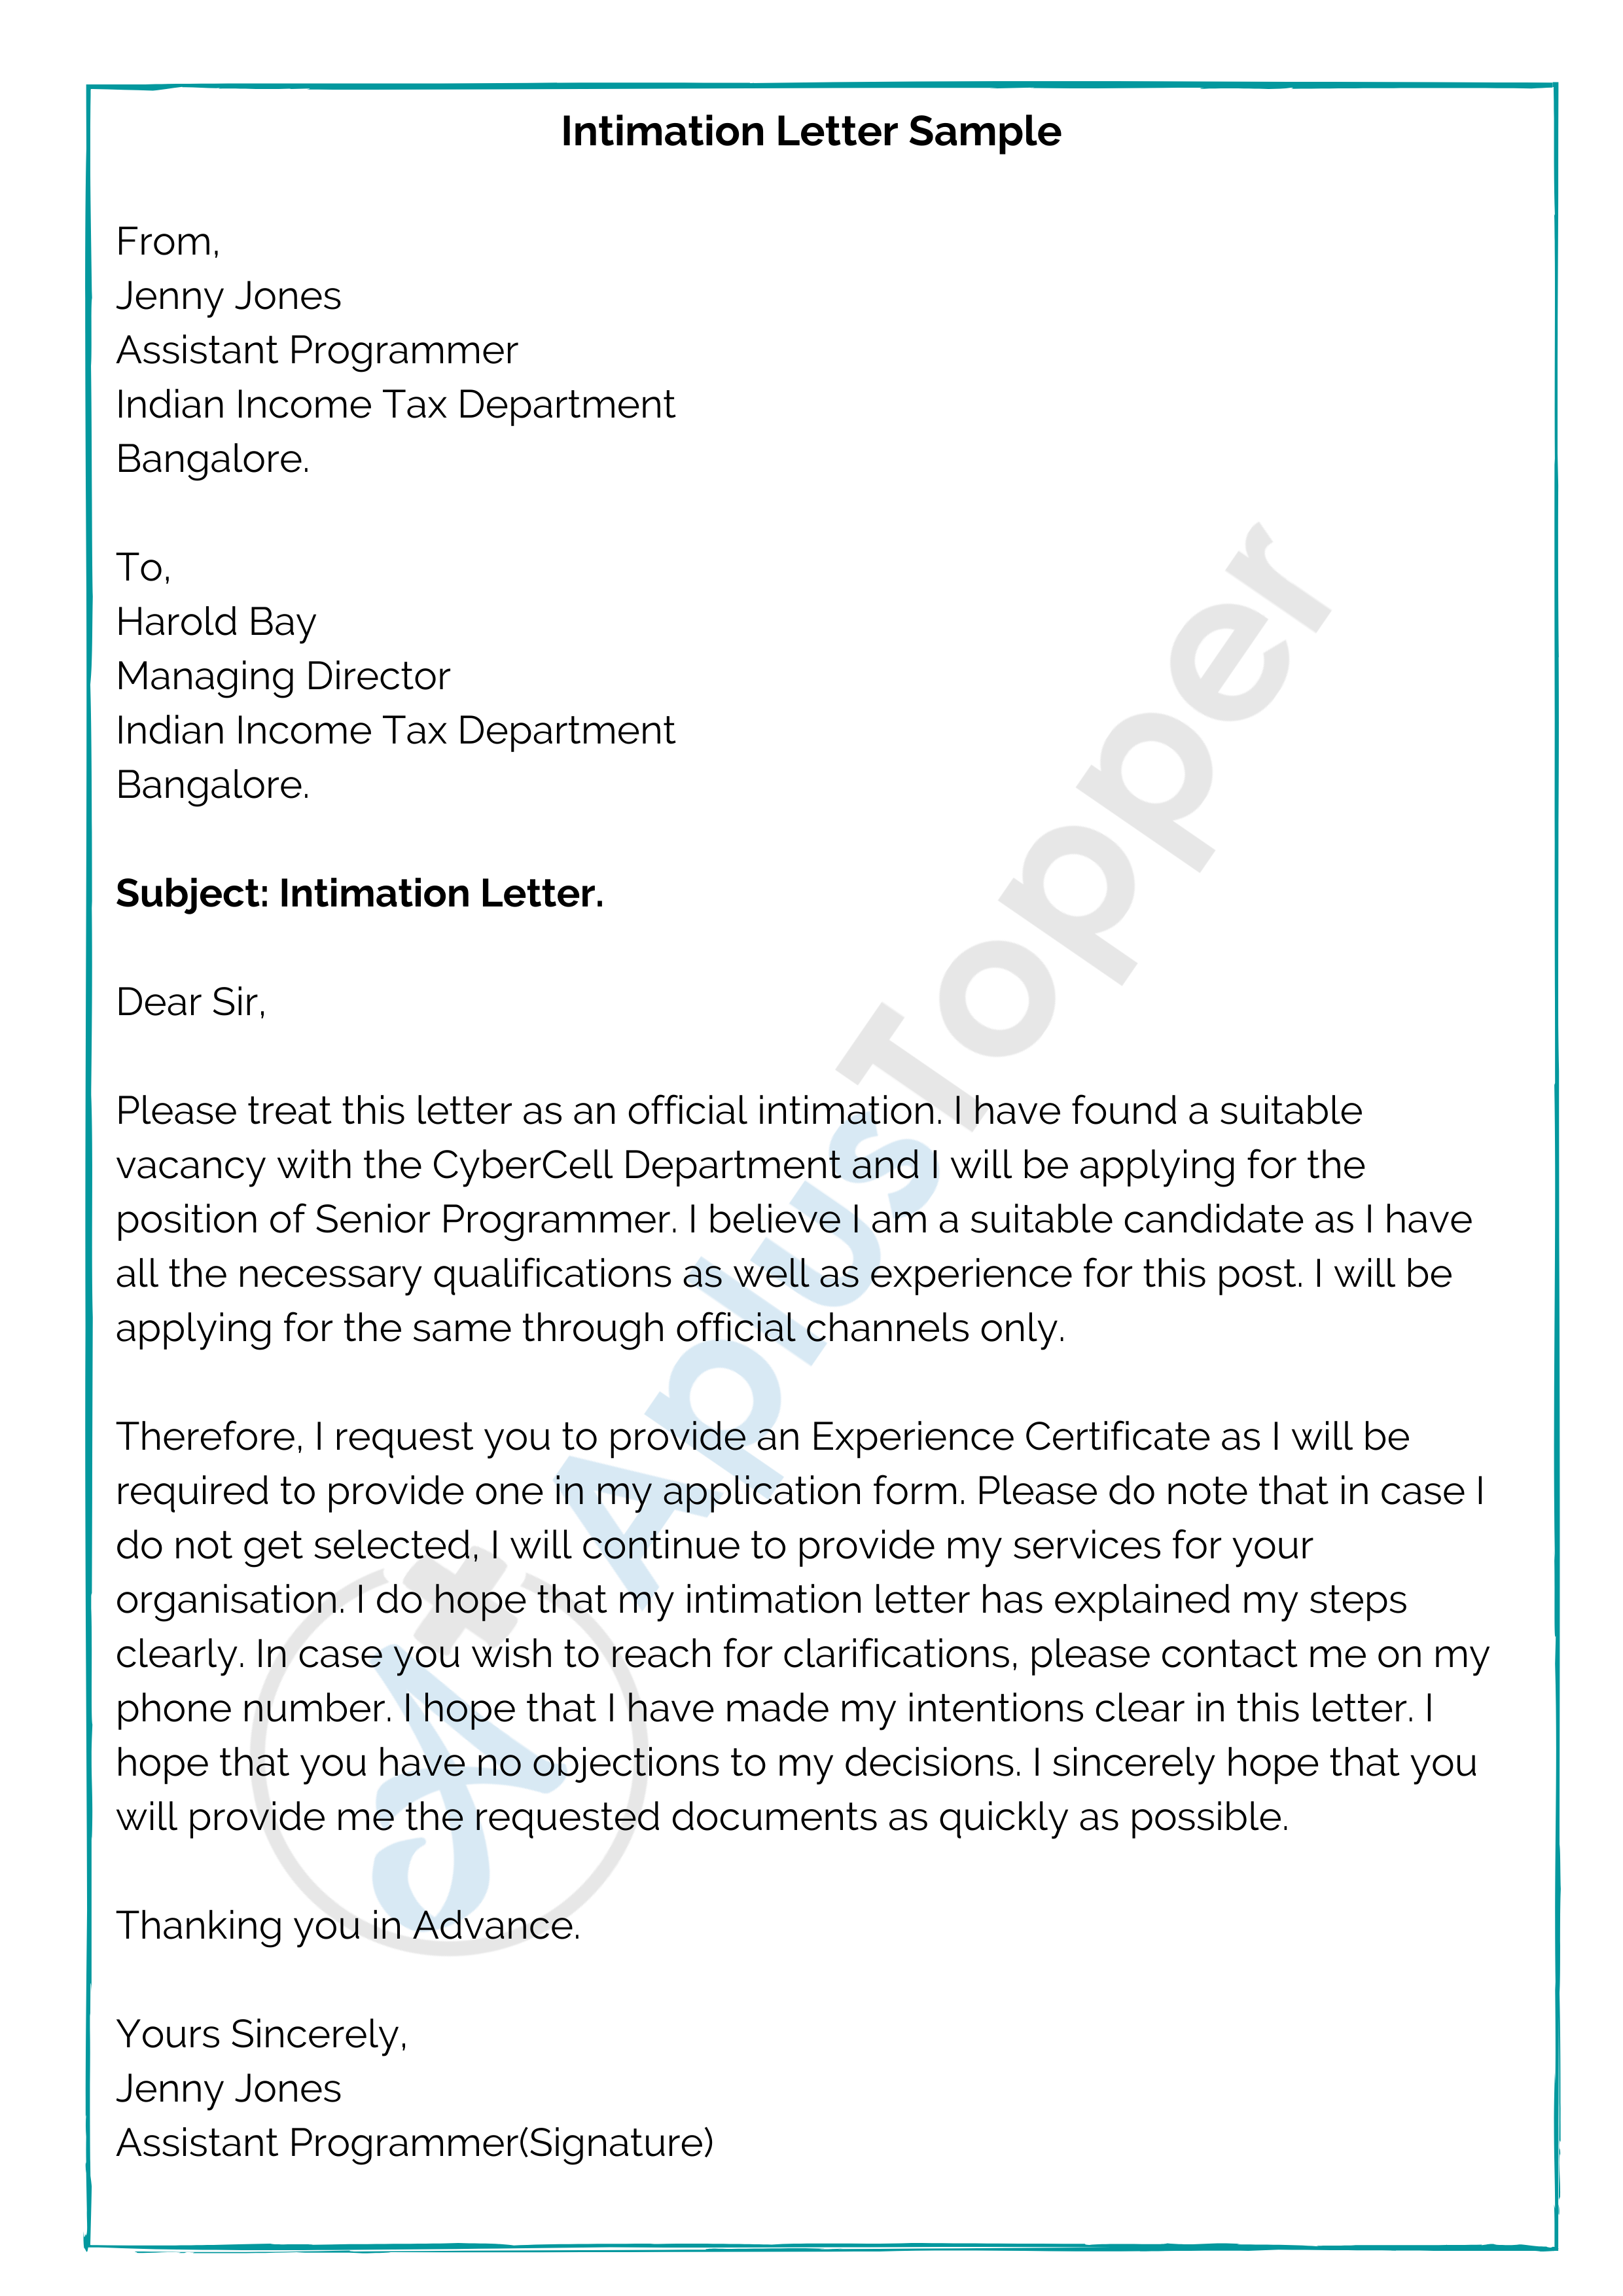 Intimation Letter  Format, Samples, How To Write an Intimation